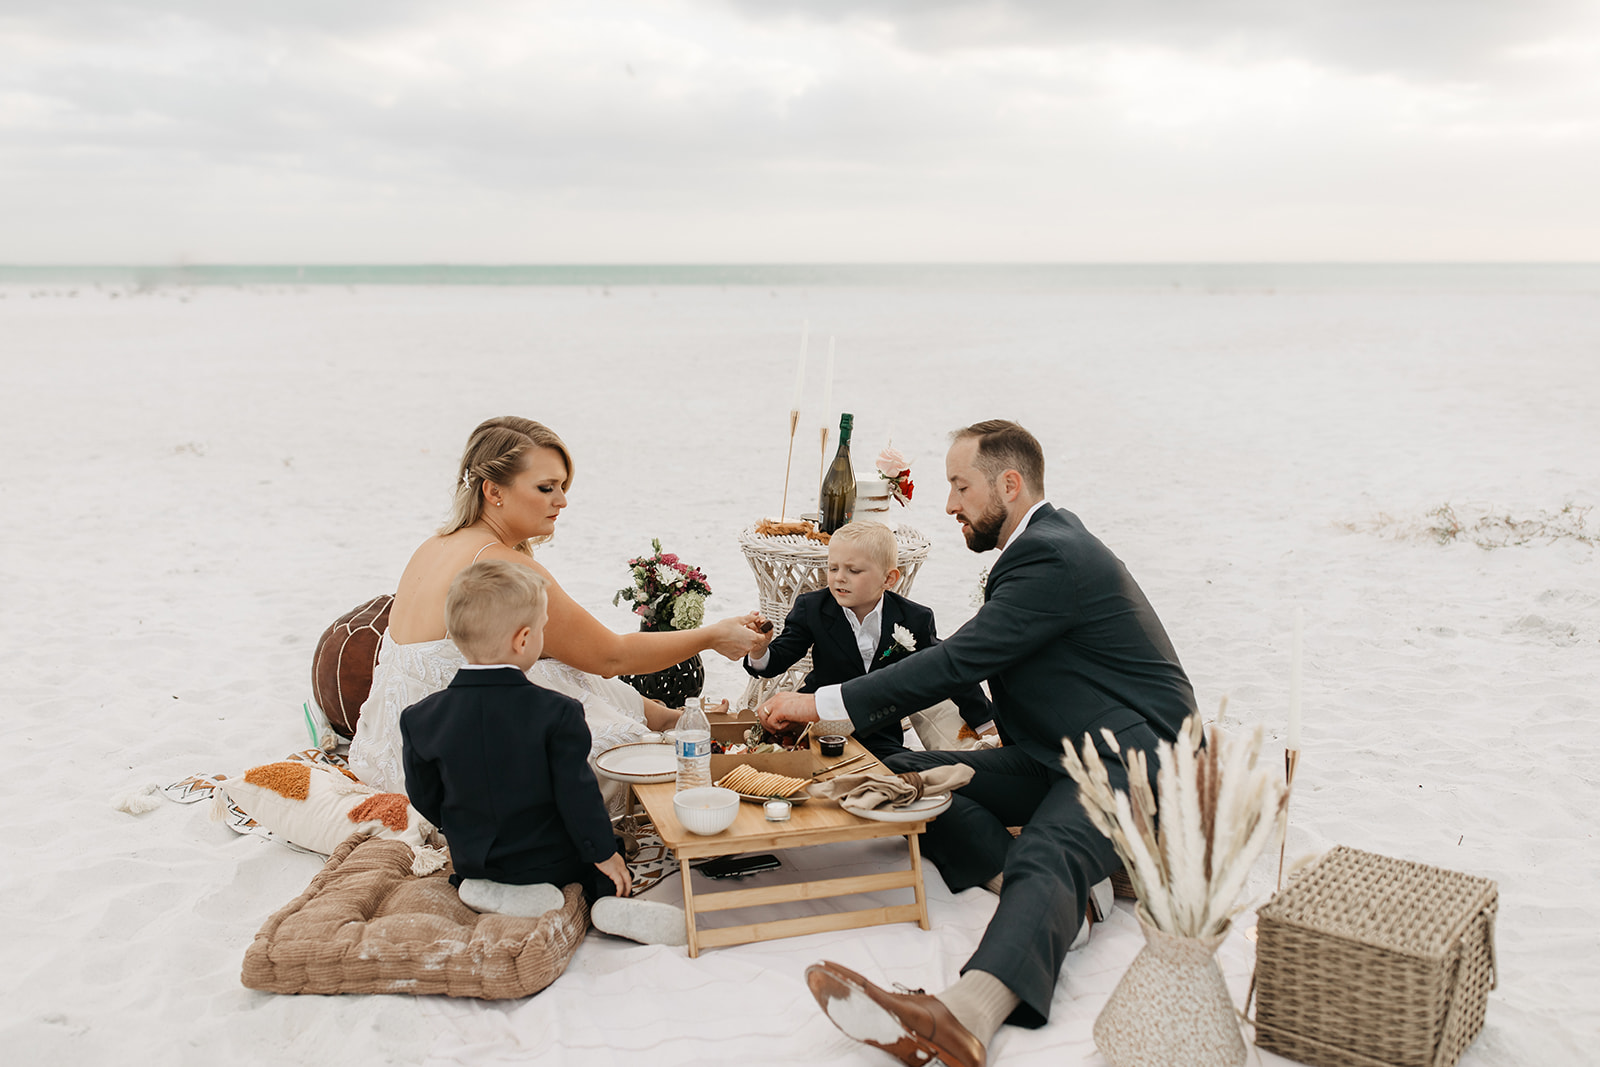 the family enjoying their picnic at the beach elopement